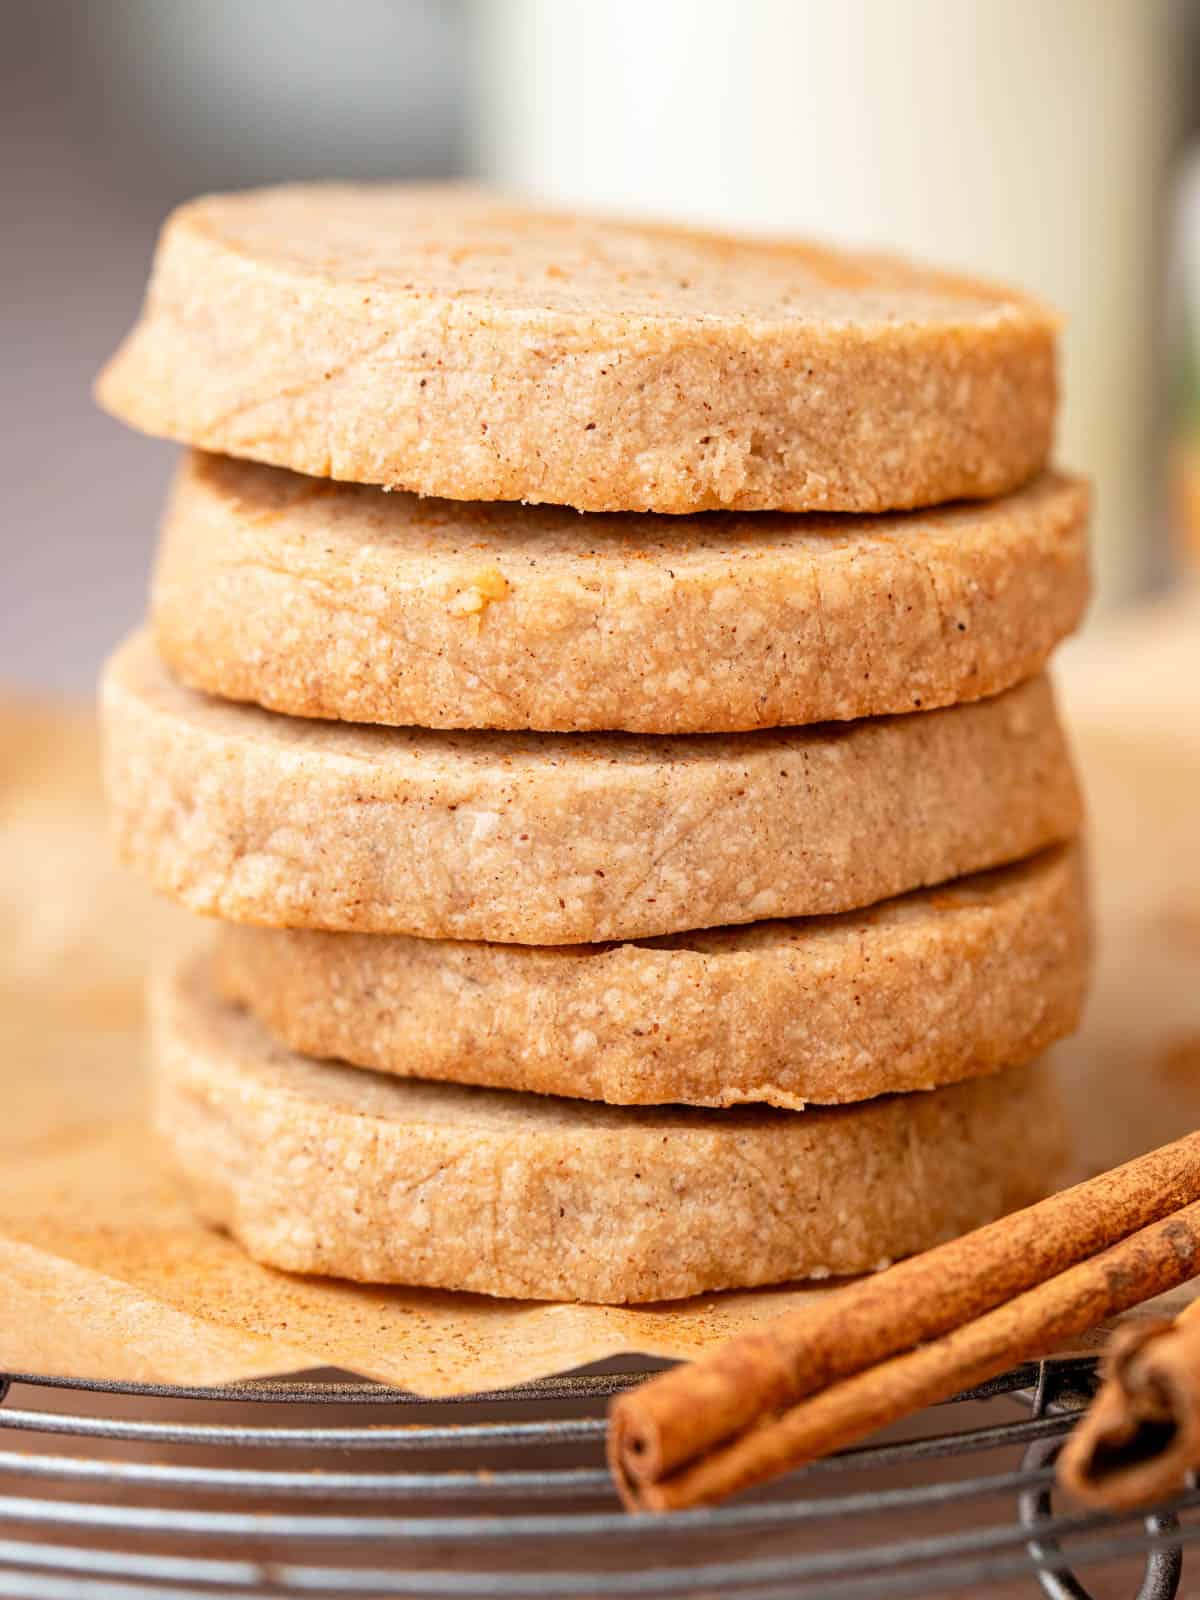 A stack of shortbread cookies on a wire rack with cinnamon sticks.